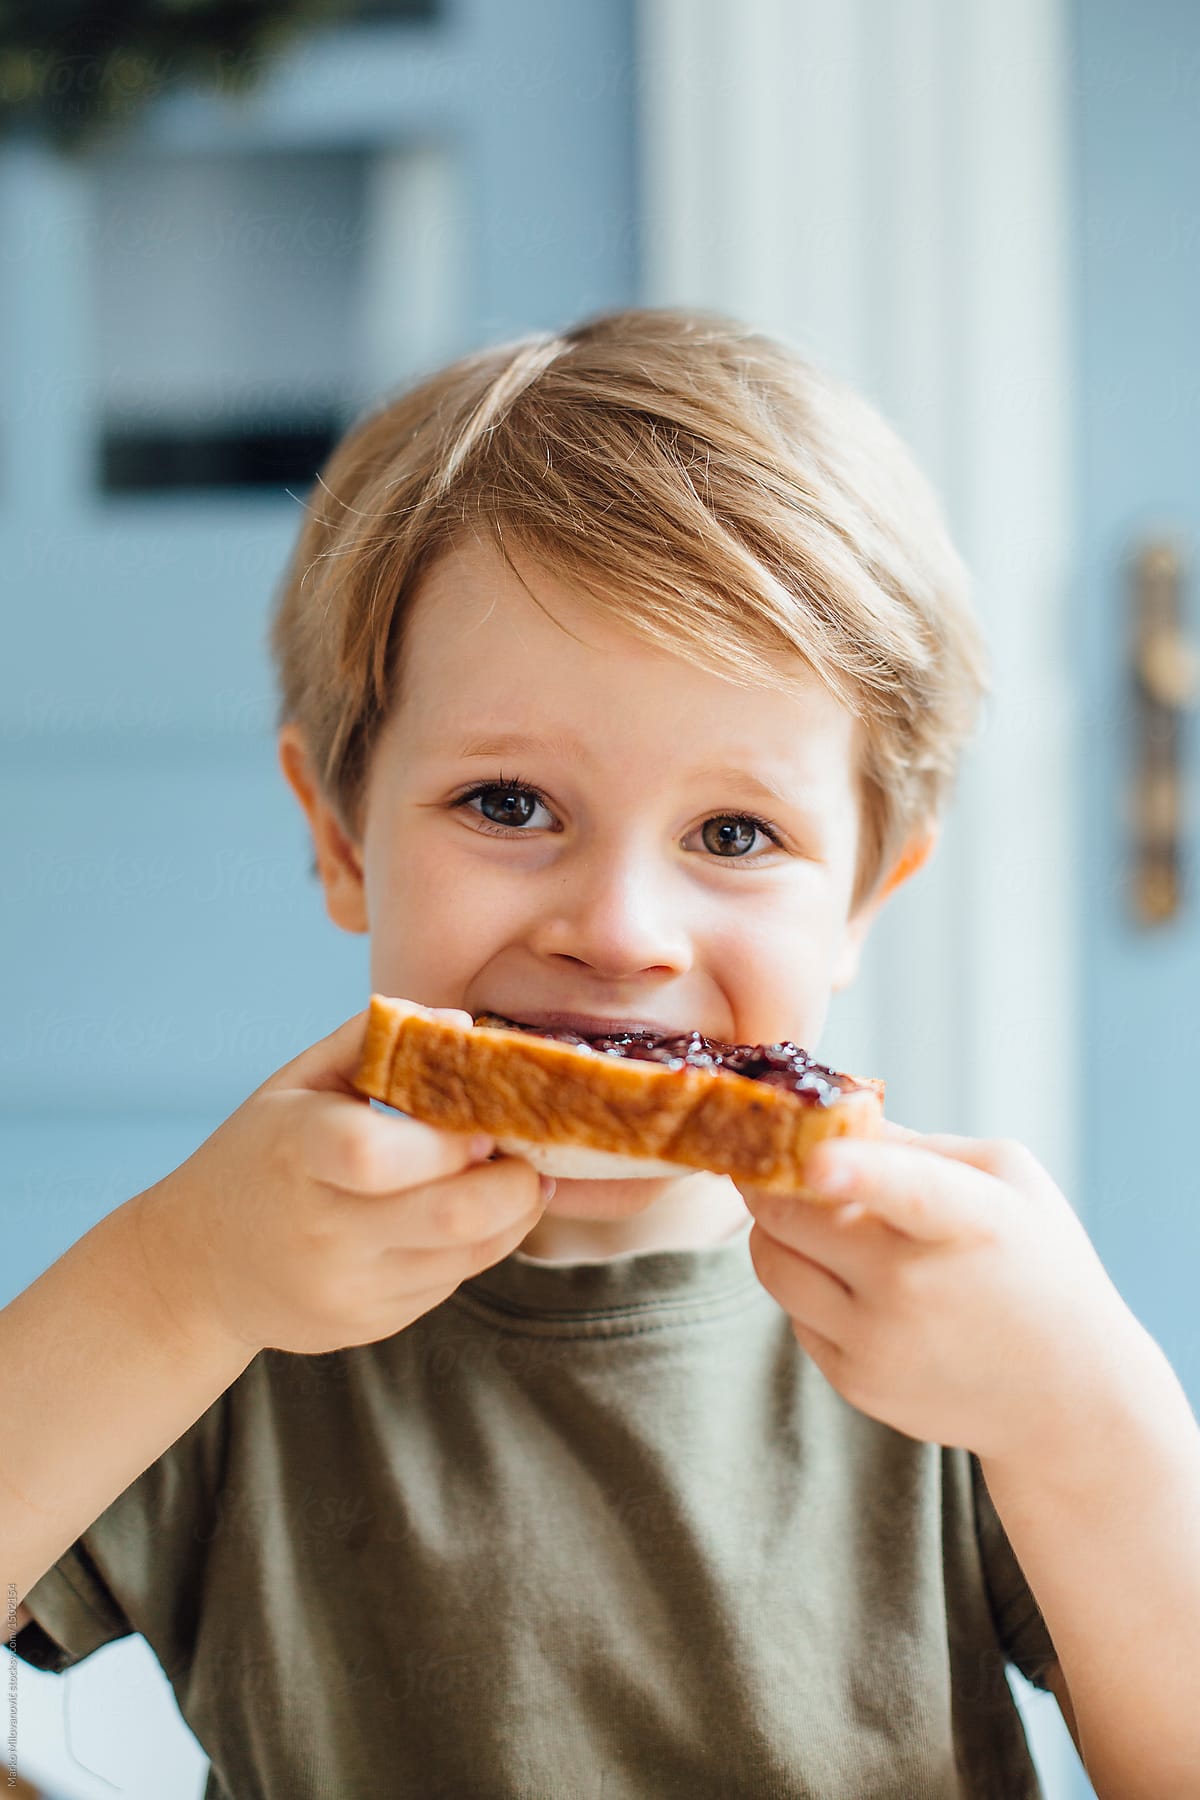 "Young Boy Eating Toast With Jam For Breakfast" by Stocksy Contributor ...